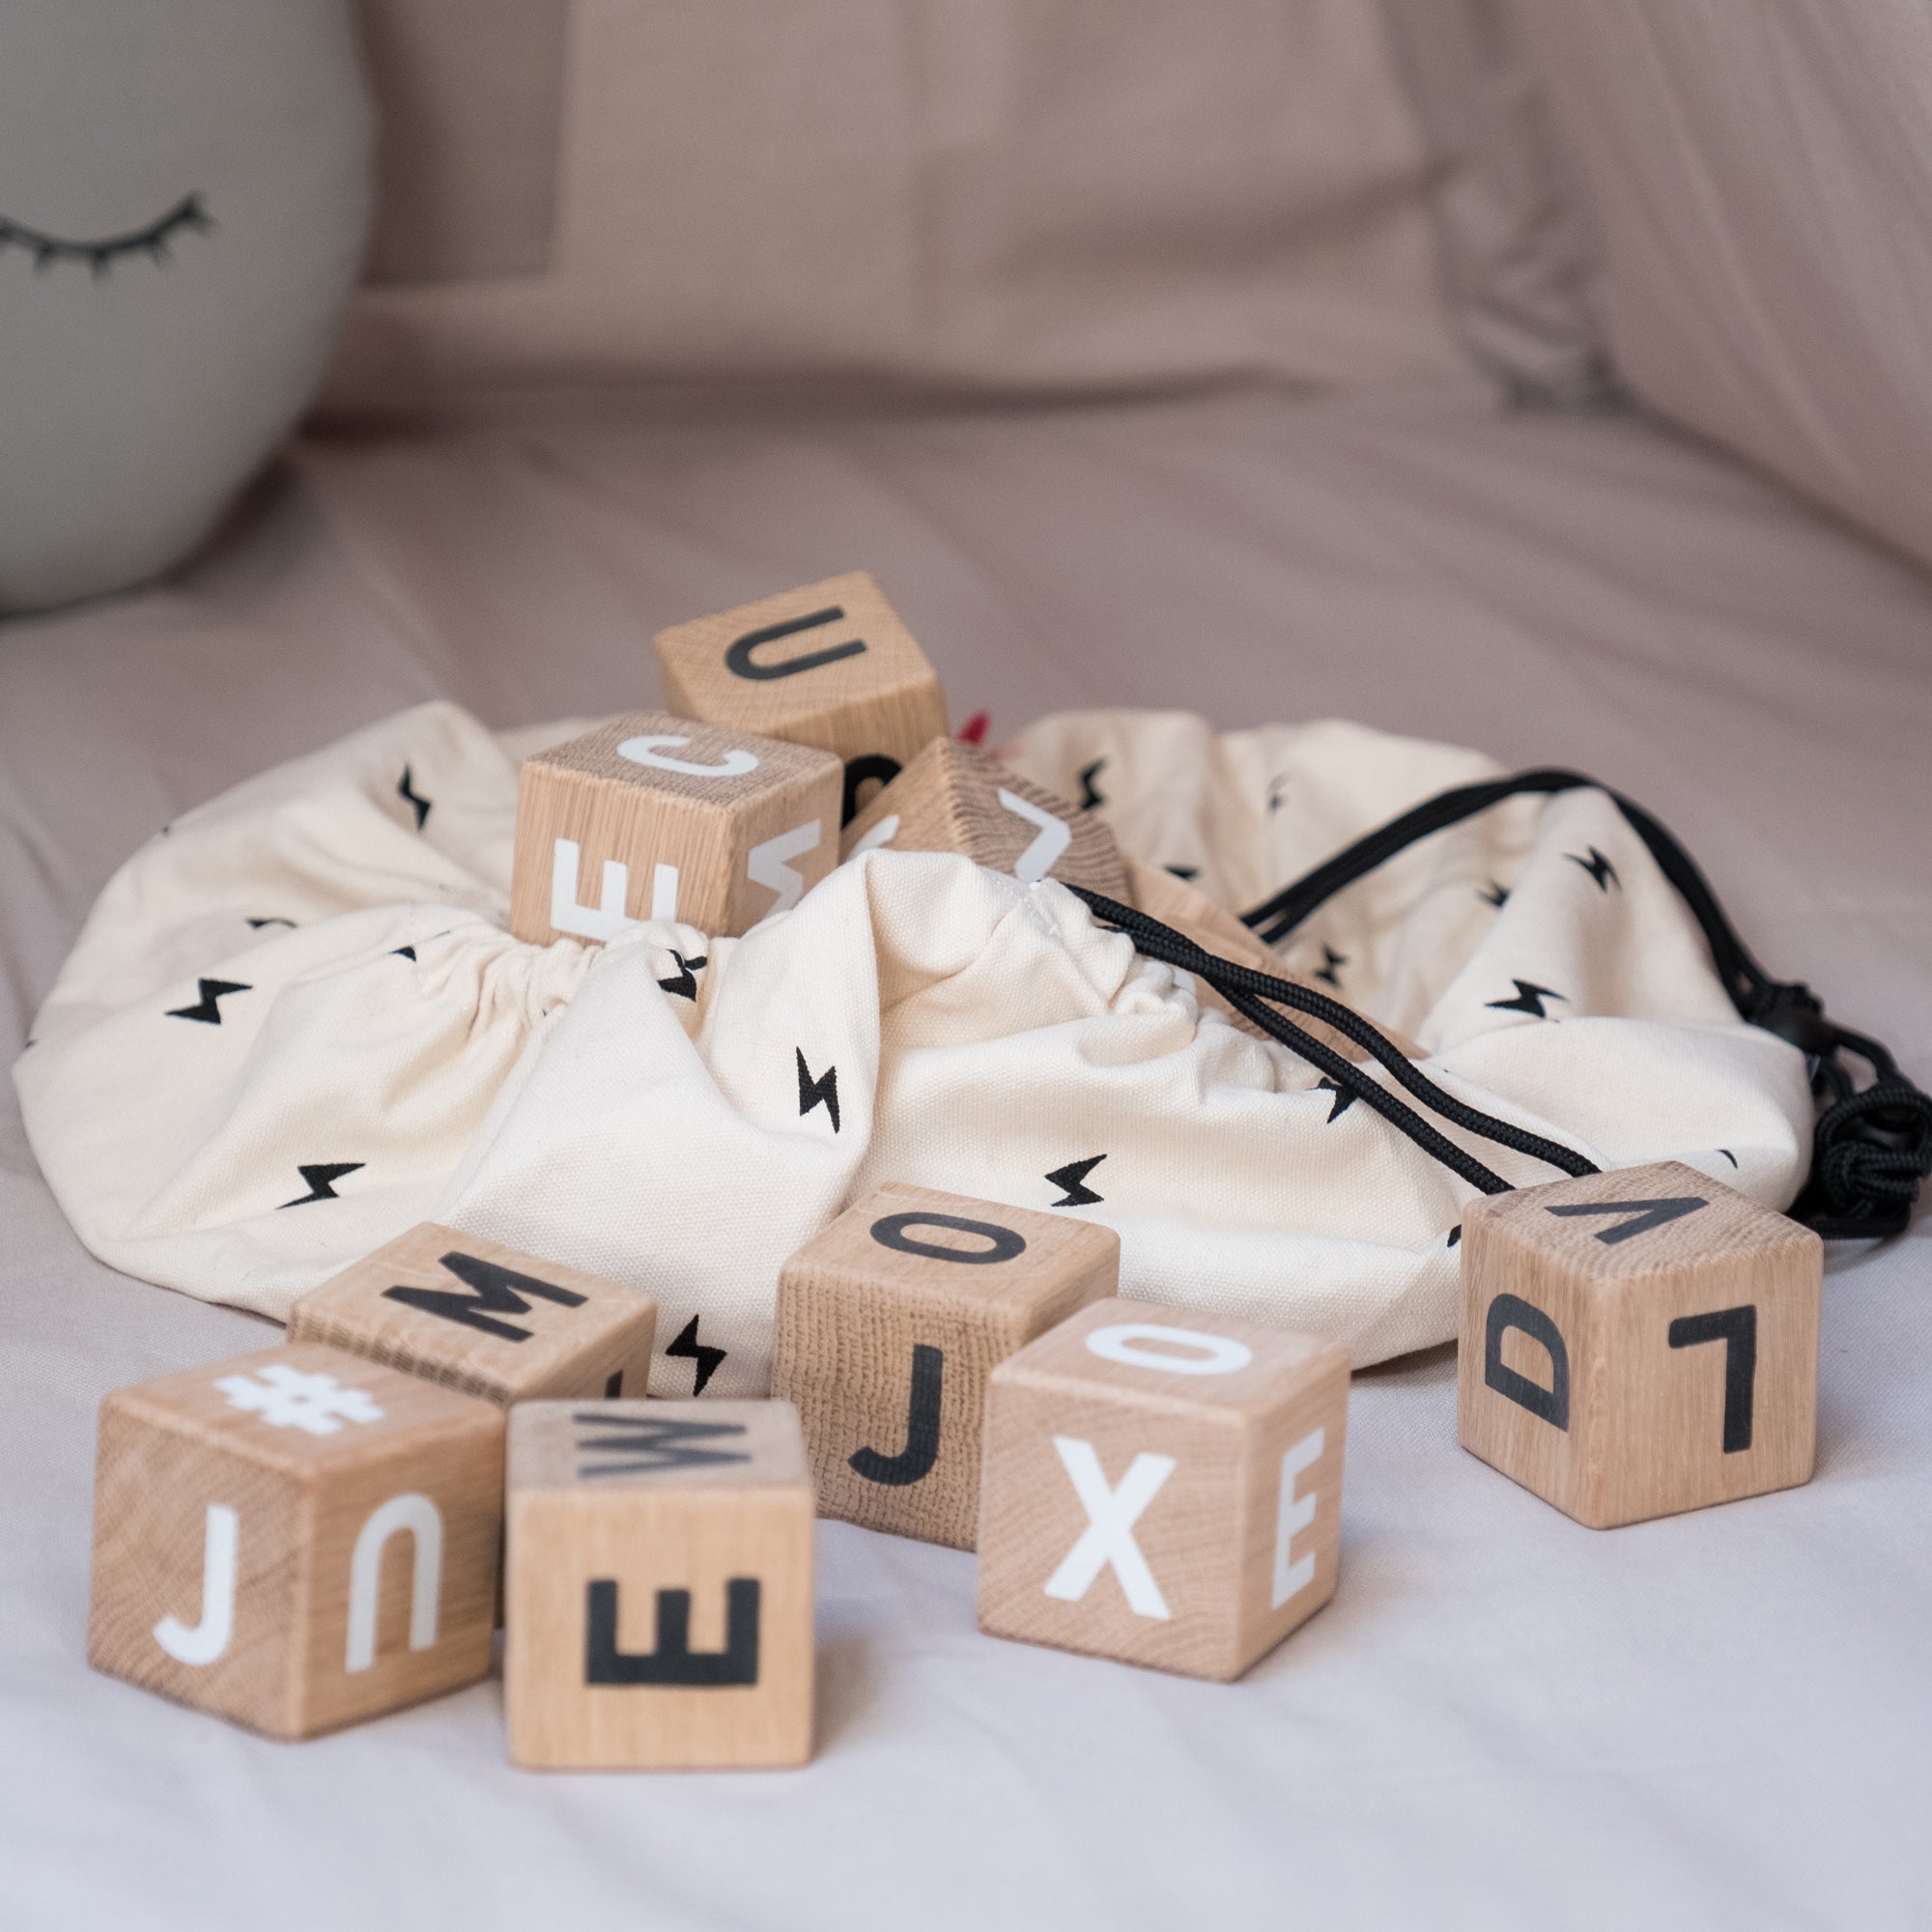 Word Cubes and Play & Go Mini Storage Bag, available at Bobby Rabbit.